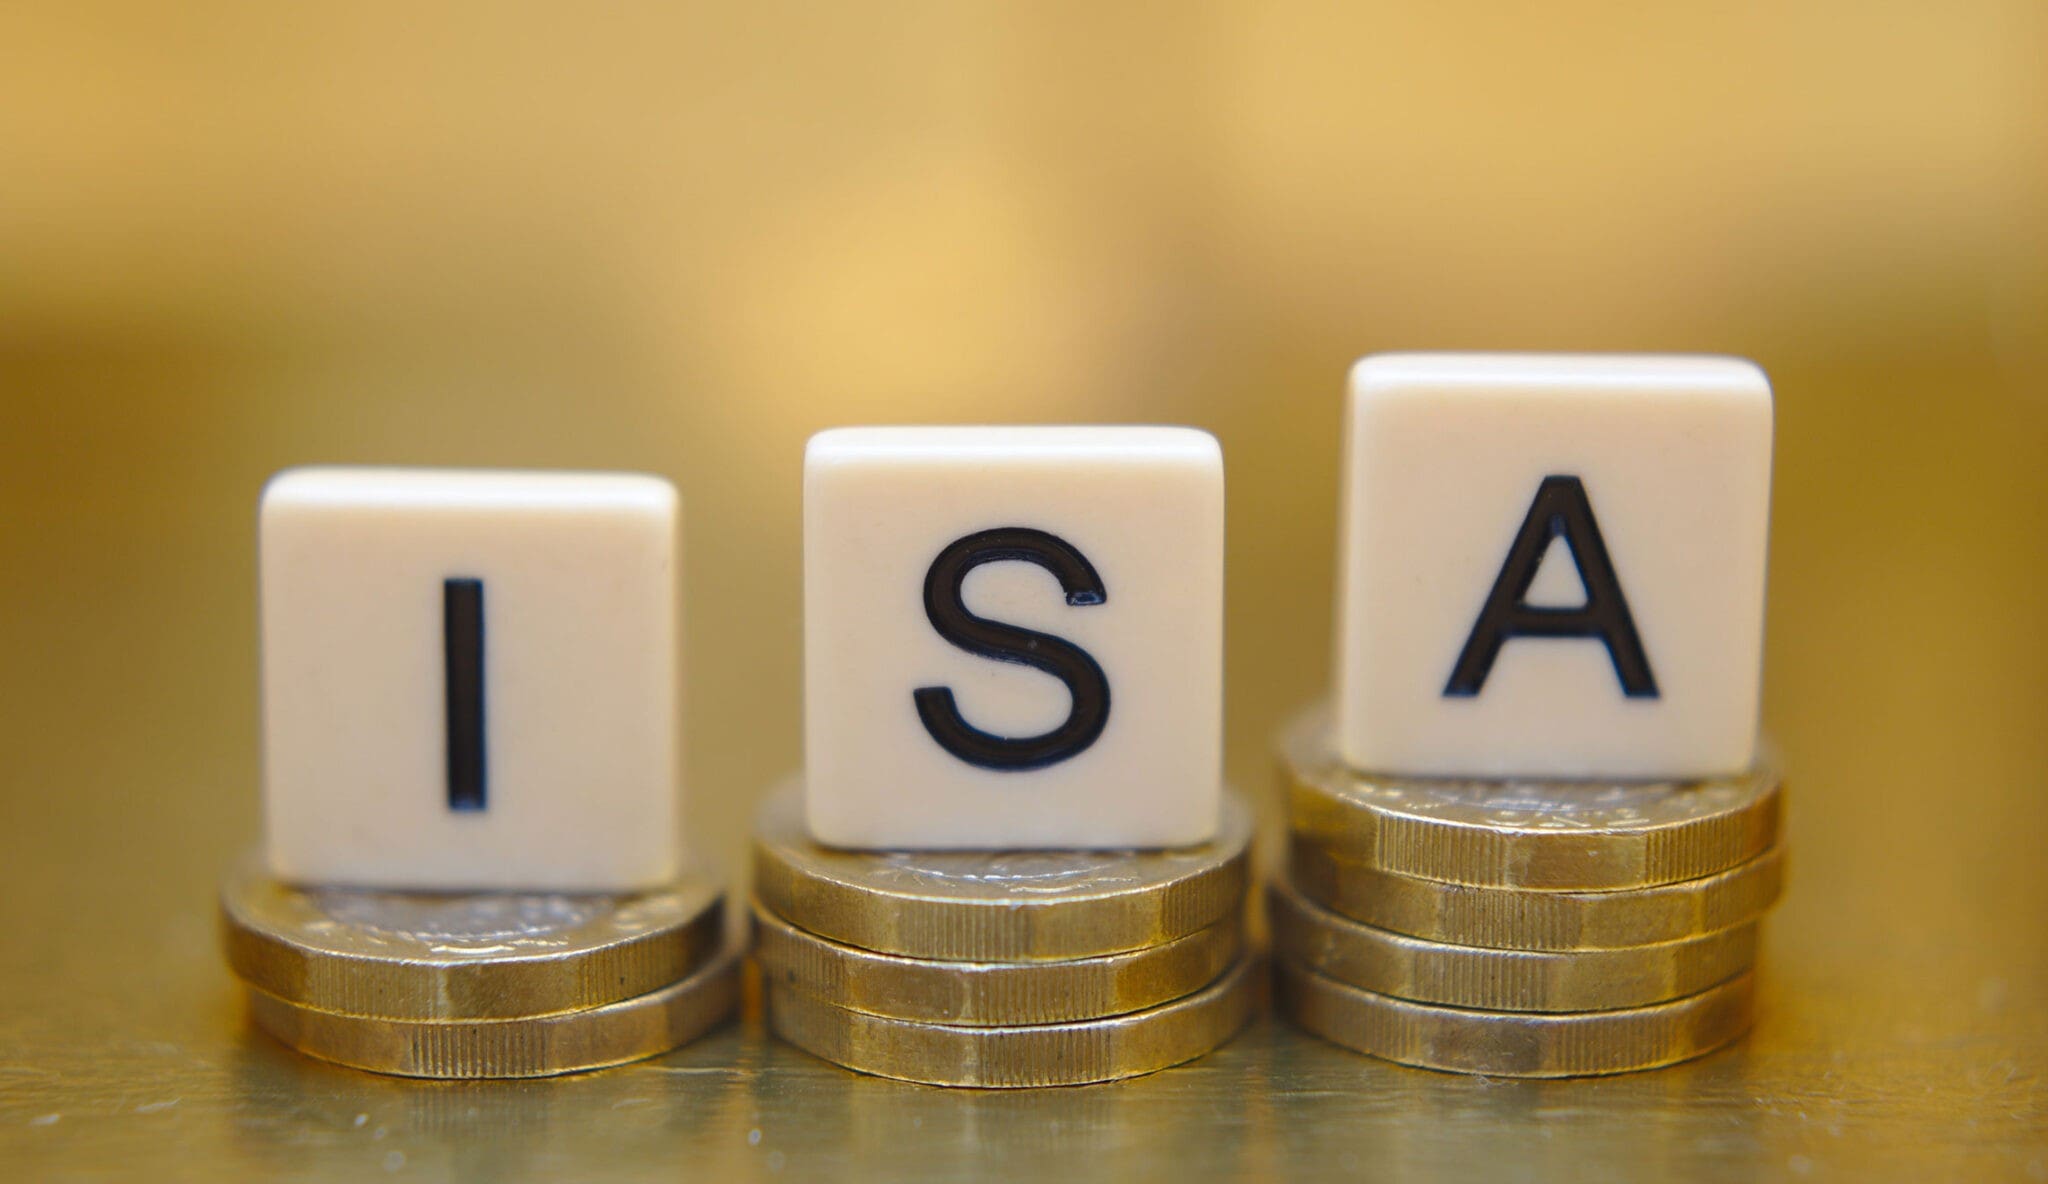 Are ISA’s subject to Inheritance Tax?